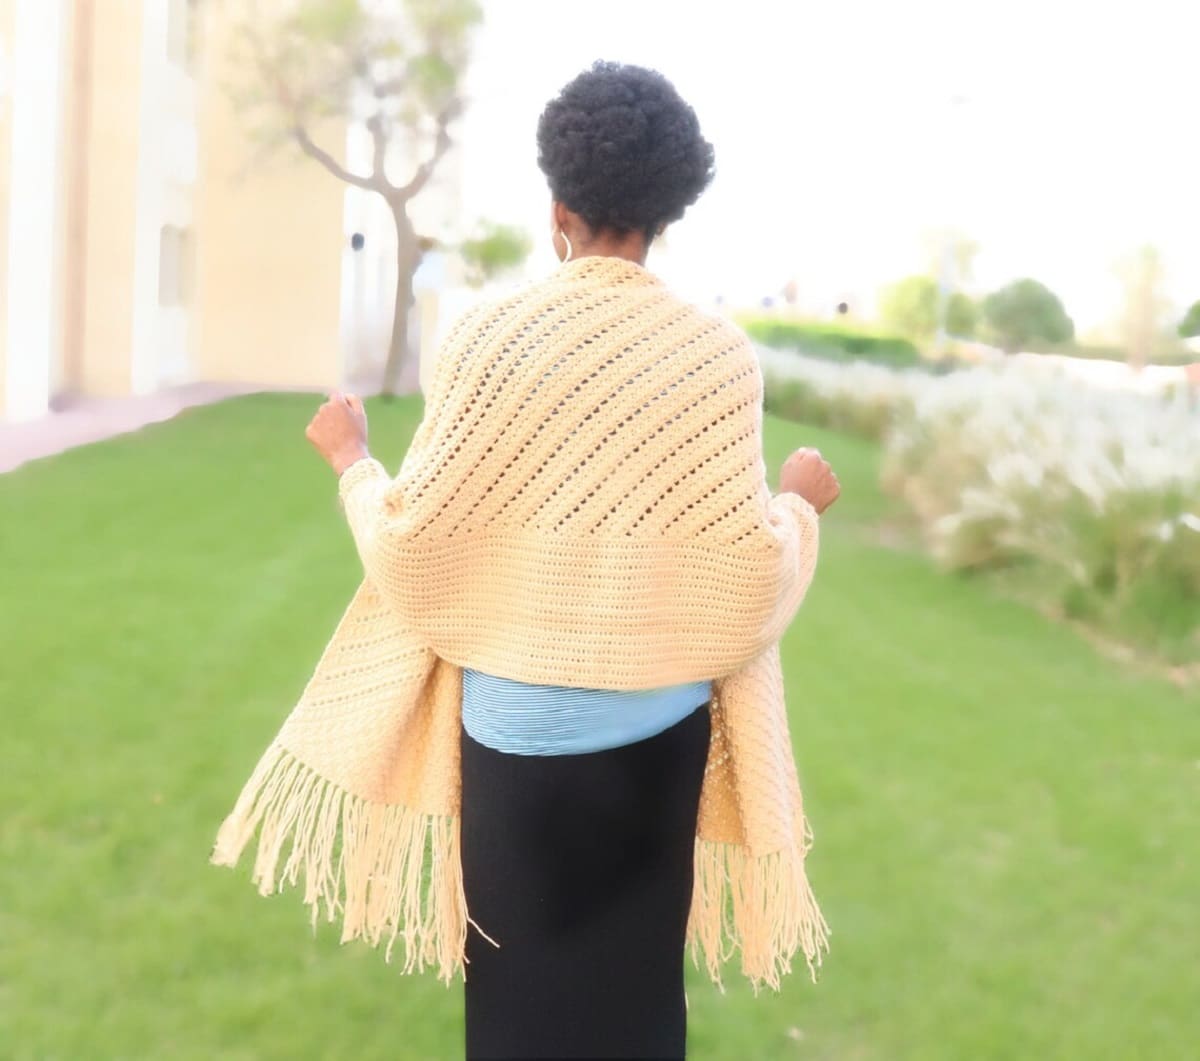 The back of a woman wearing a yellow crochet prayer shawl with yellow tassels along the bottom.